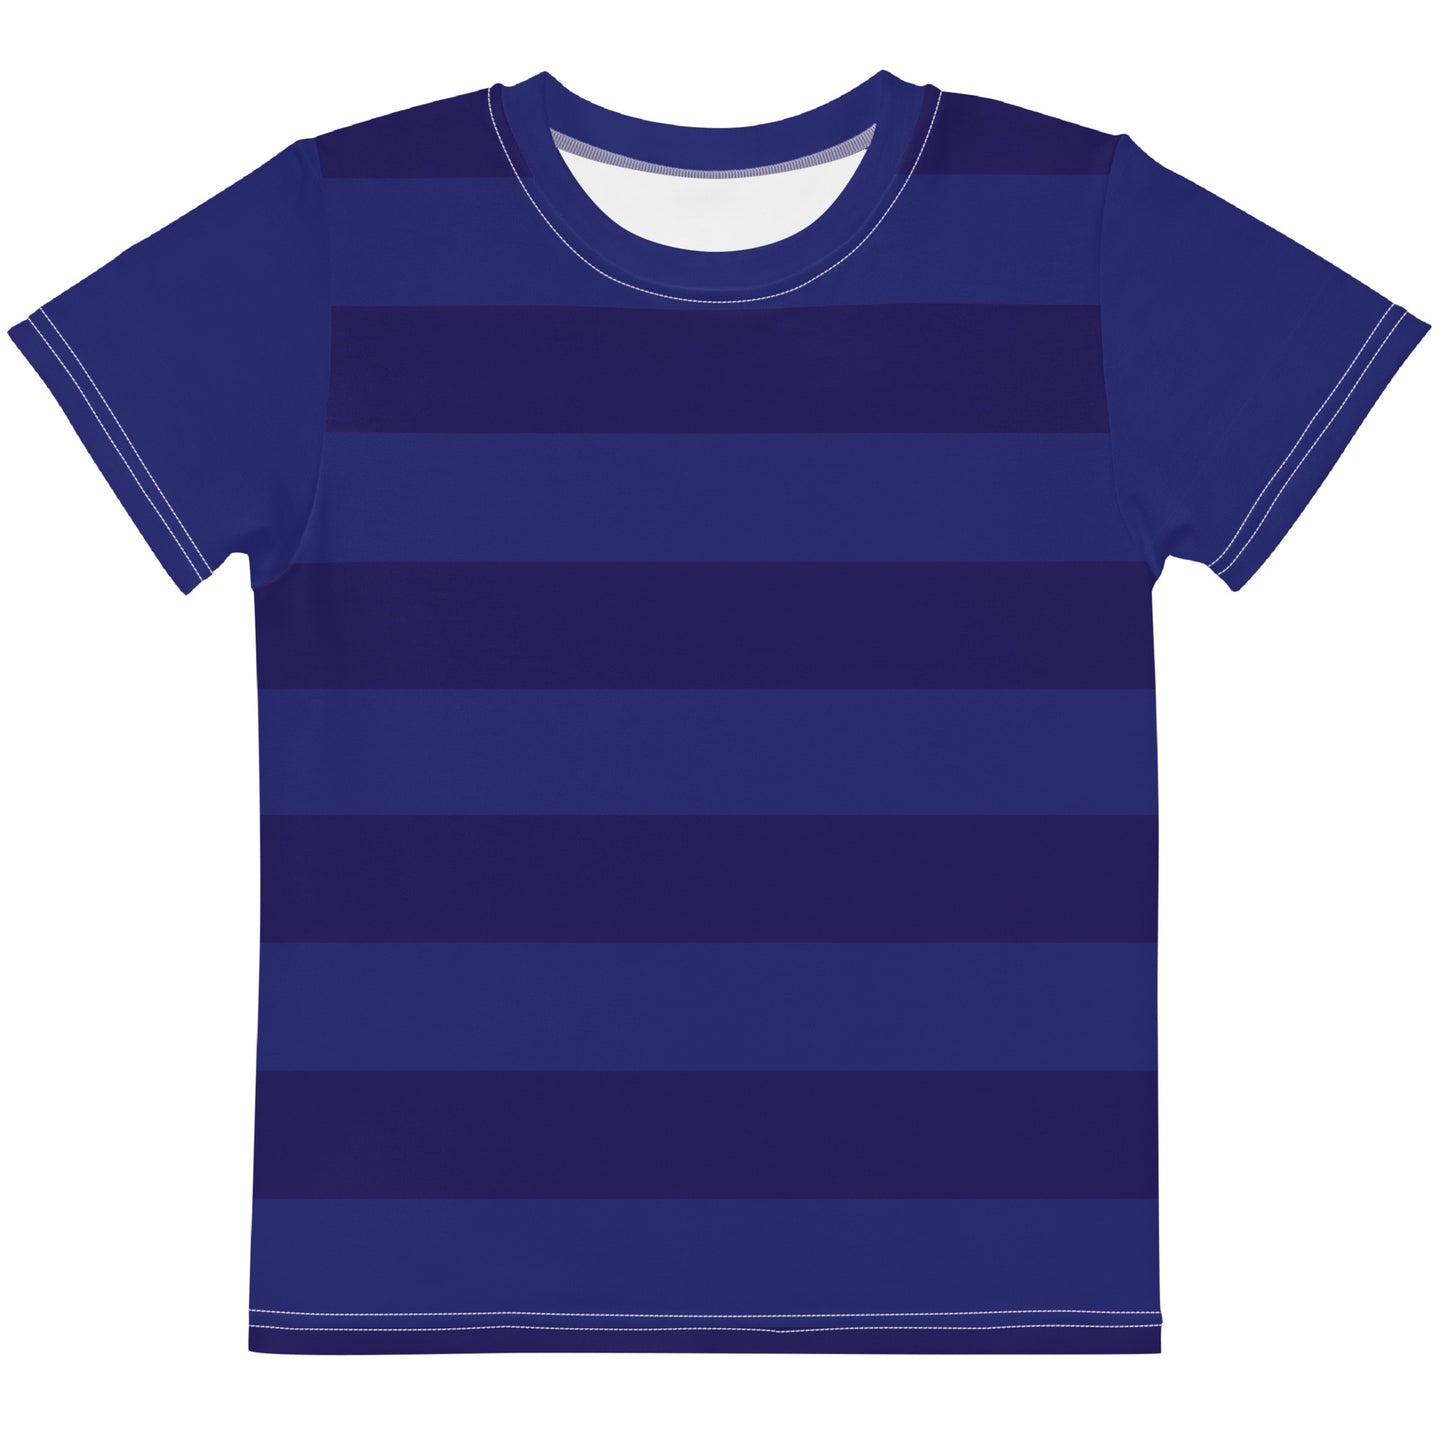 Sailor Blue - Sustainably Made Kids T-Shirt